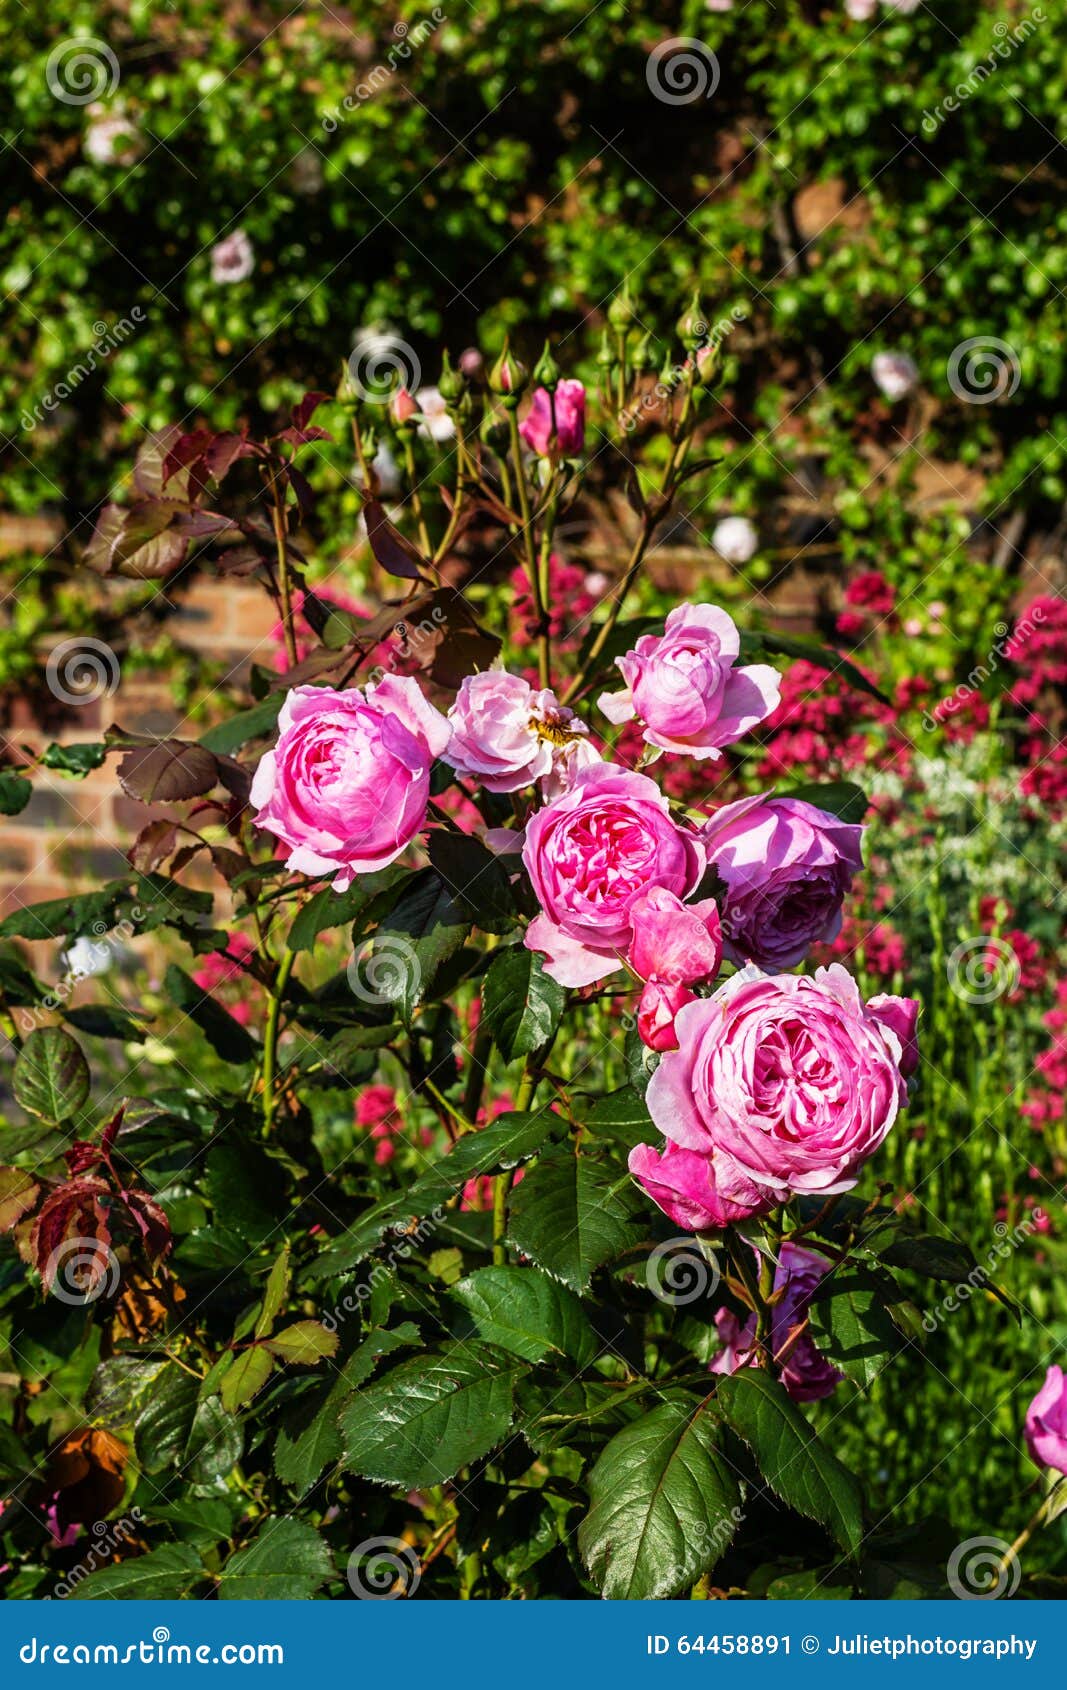 Beautiful Pink Roses in the Garden Stock Image - Image of design ...